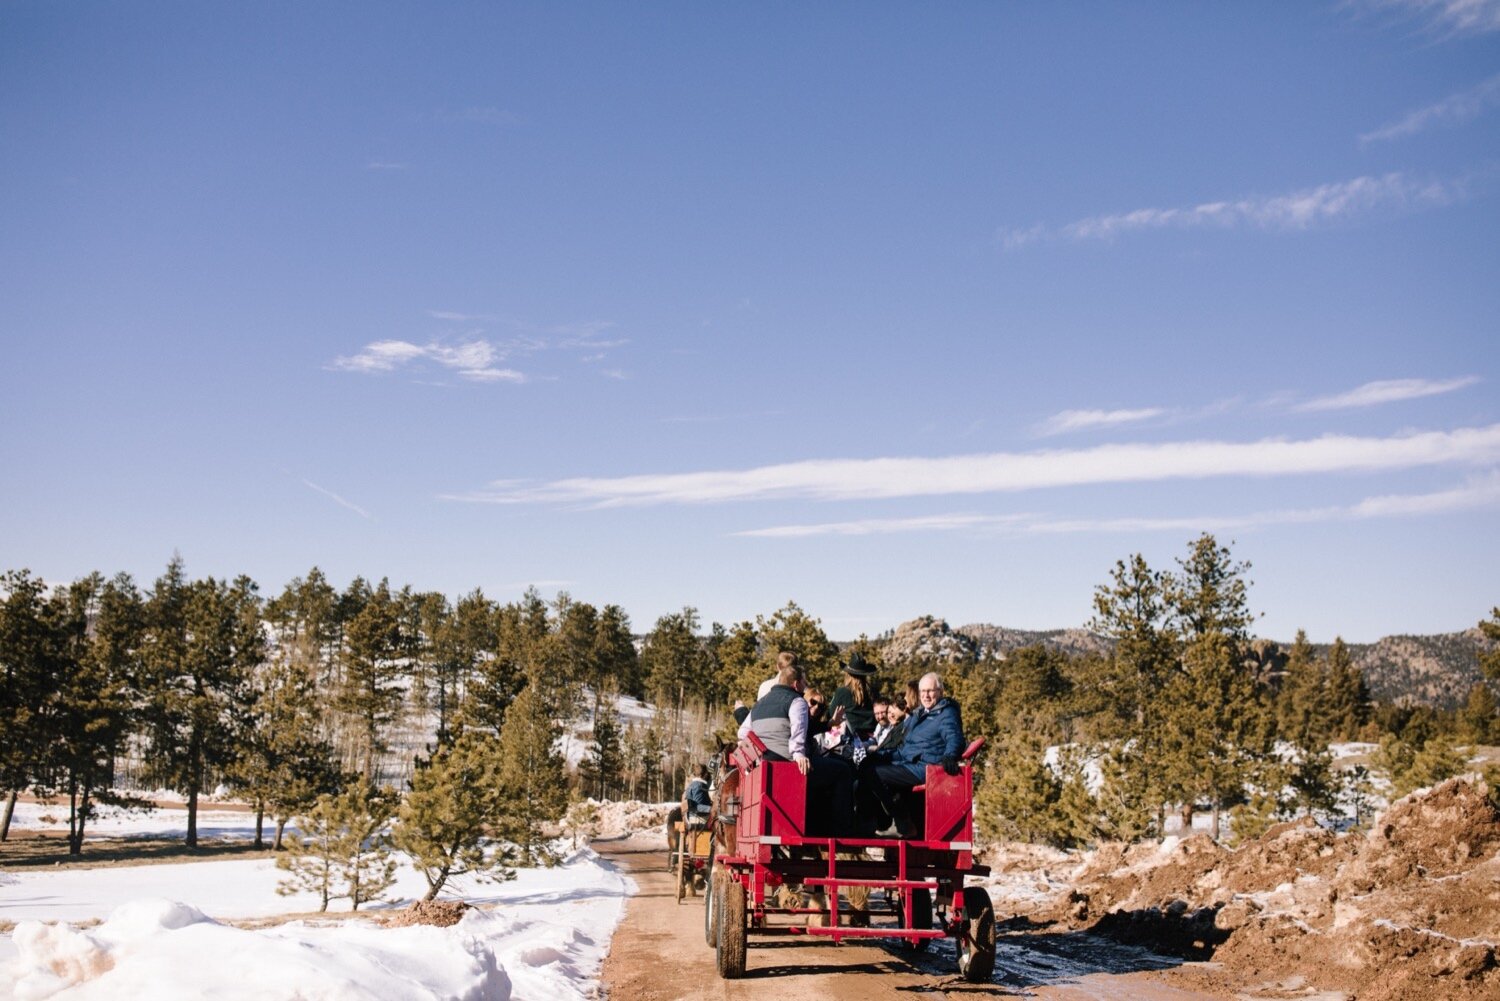  Horse pulled carriage wedding, Winter Wedding, Colorado Wedding, Snowy Wedding, Mountain Wedding, Colorado Wedding Planner, Colorado Wedding Rentals, Red Feather Lakes Wedding, Fort Collins Wedding, Rocky Mountain Wedding, Rocky Mountain Bride, Inti